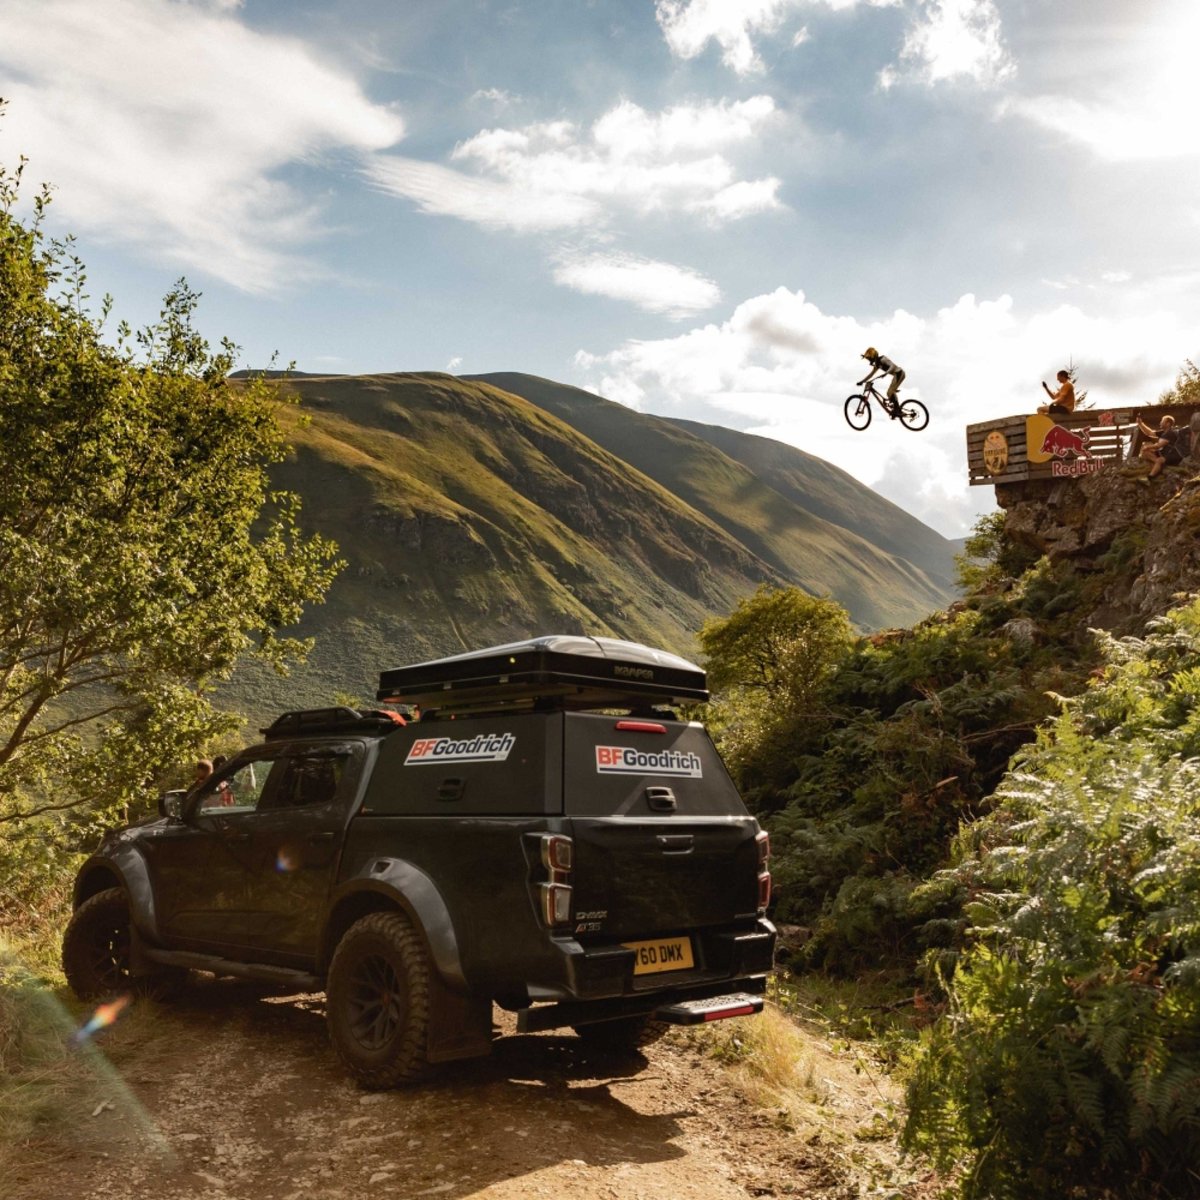 Throwing it back to 22's Red Bull Hardline, where Basecamp truly earned its stripes! 🚵‍♂️💥 Our Isuzu D-Max @ArcticTrucks AT35 proved its mettle, conquering the rugged terrain and supporting riders with ease, ensuring nothing could derail the action. #RedBullHardline @RedBullBike